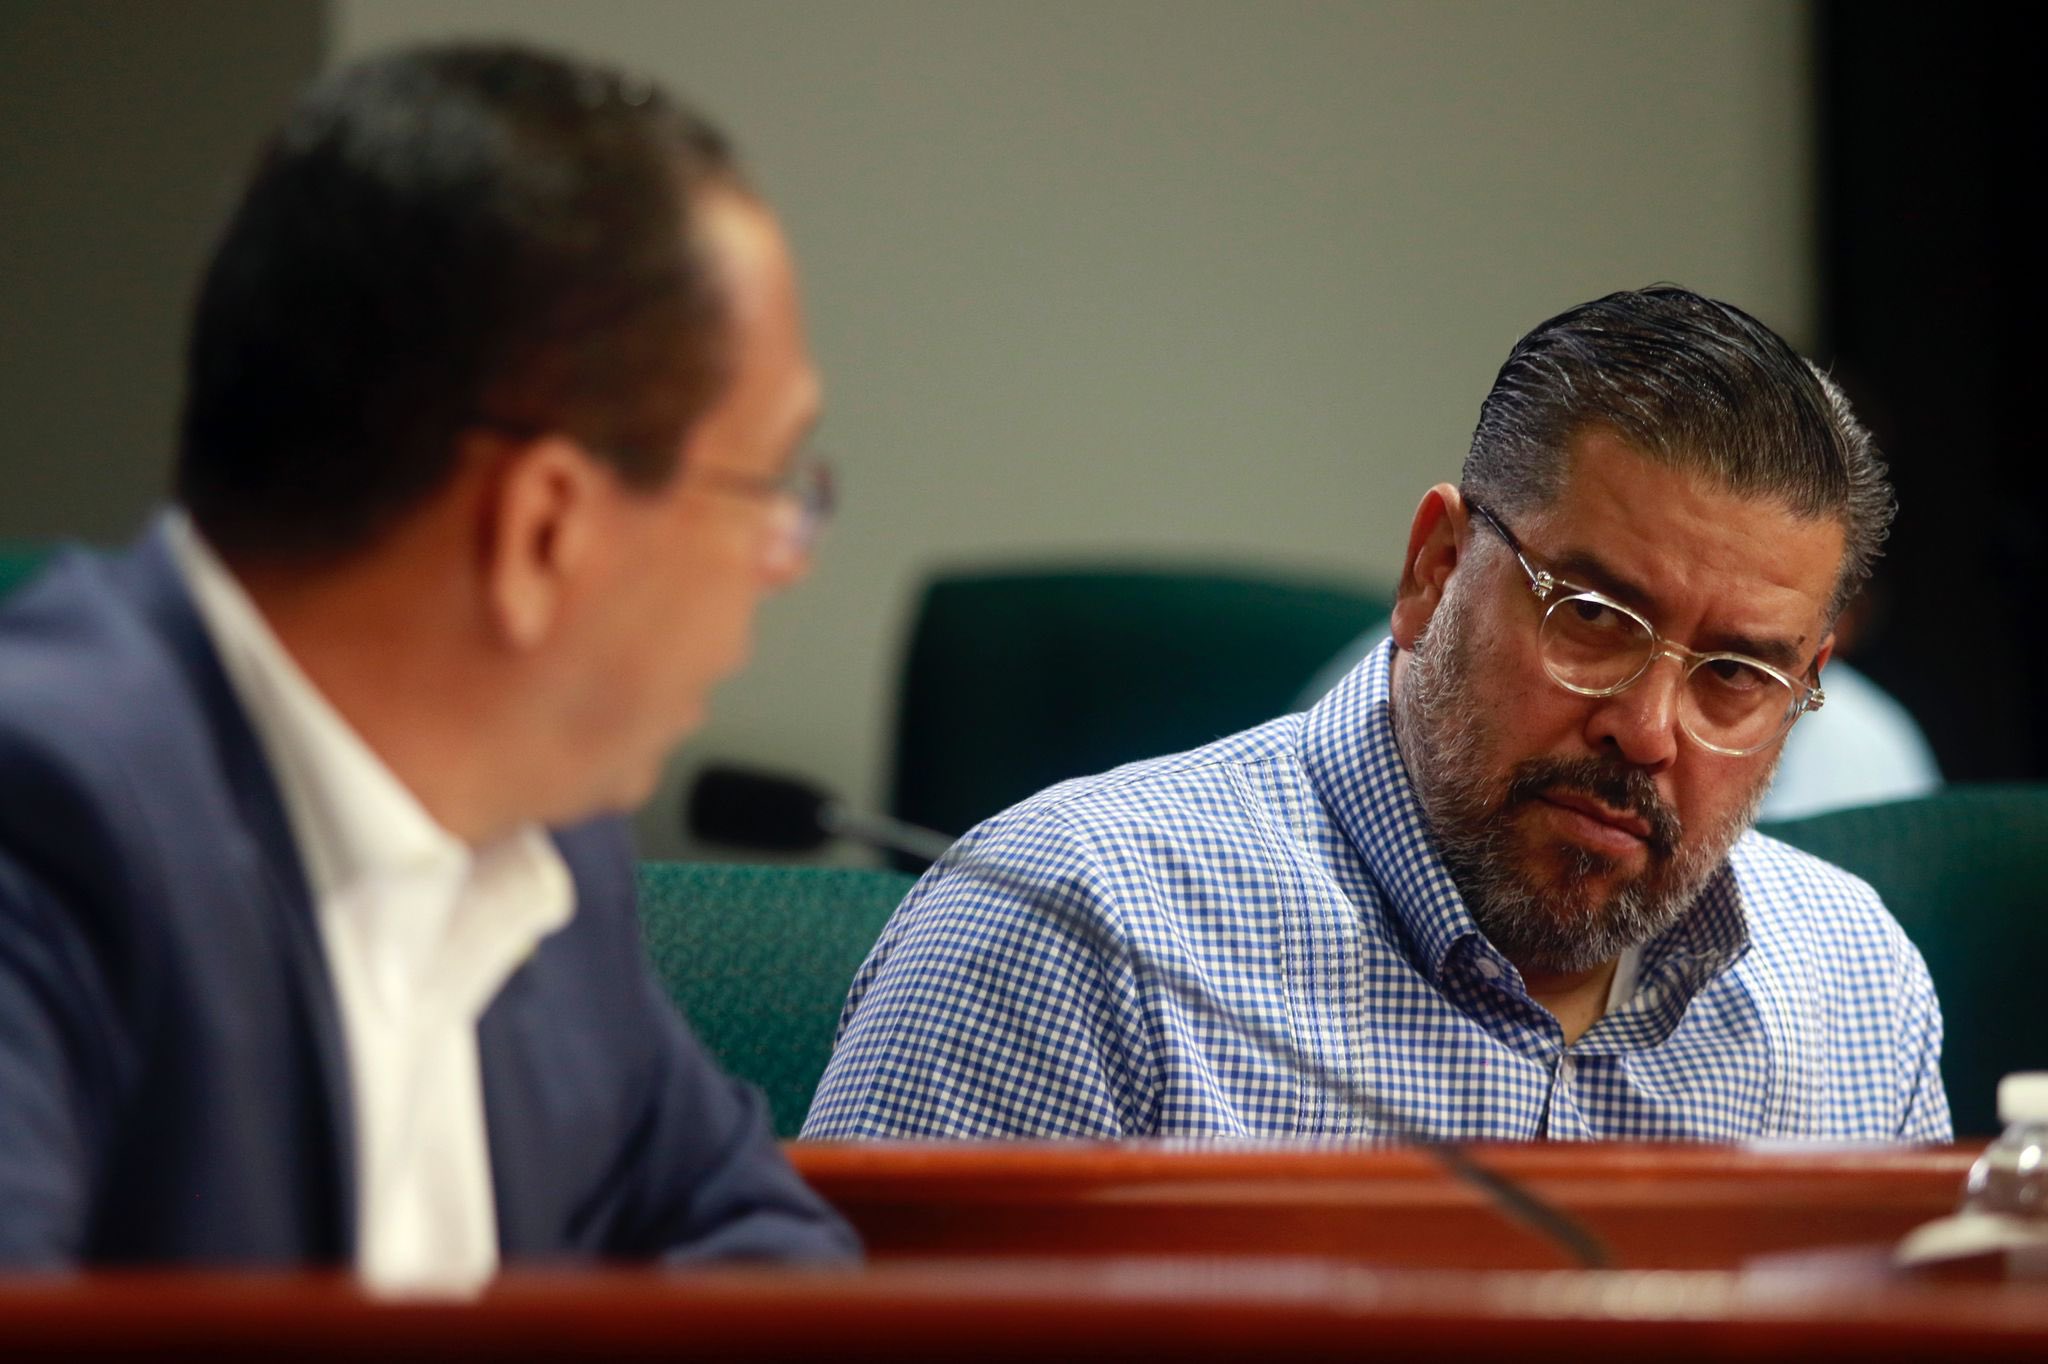 How the rise of Rafael Tatito Hernandez is fueling tensions in the Popular Democratic Party